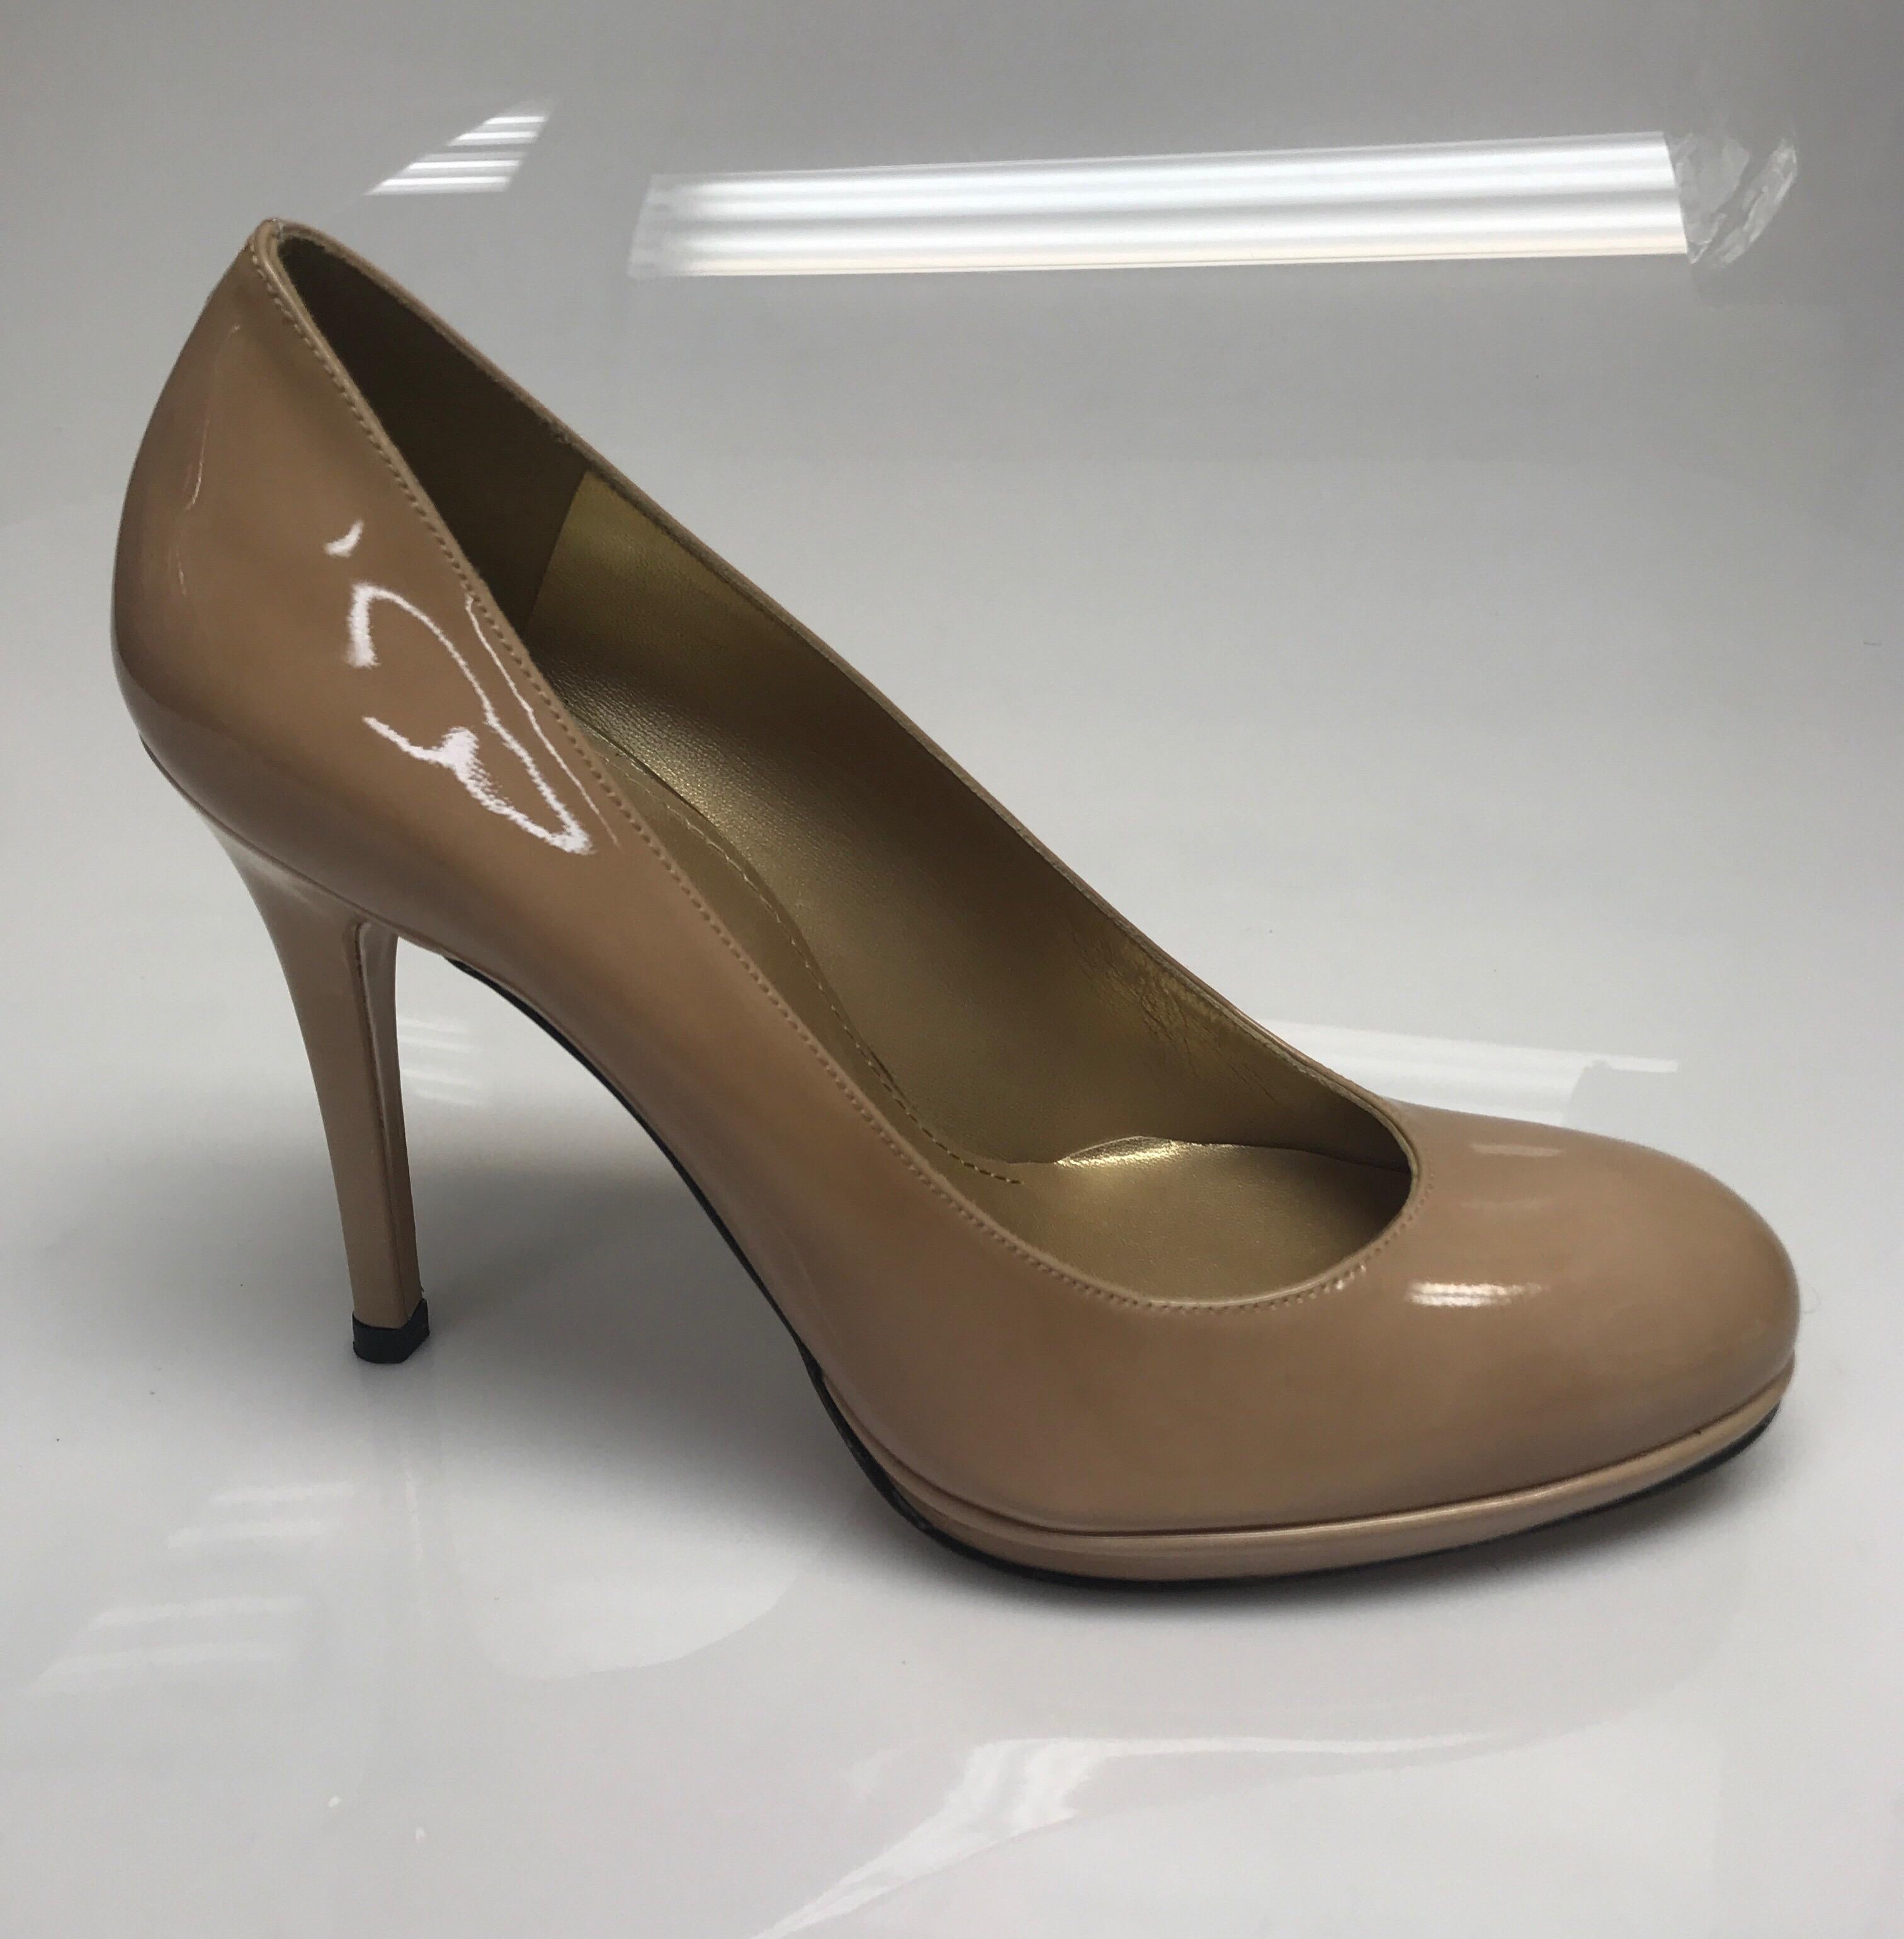 Stuart Weitzman Nude Patent Leather Heel-8. These beautiful Stuart Weitzman heels are in excellent condition, with exception to the bottom showing sign of use, as shown in pictures. These shoes are made of a nude patent leather. They are a rounded